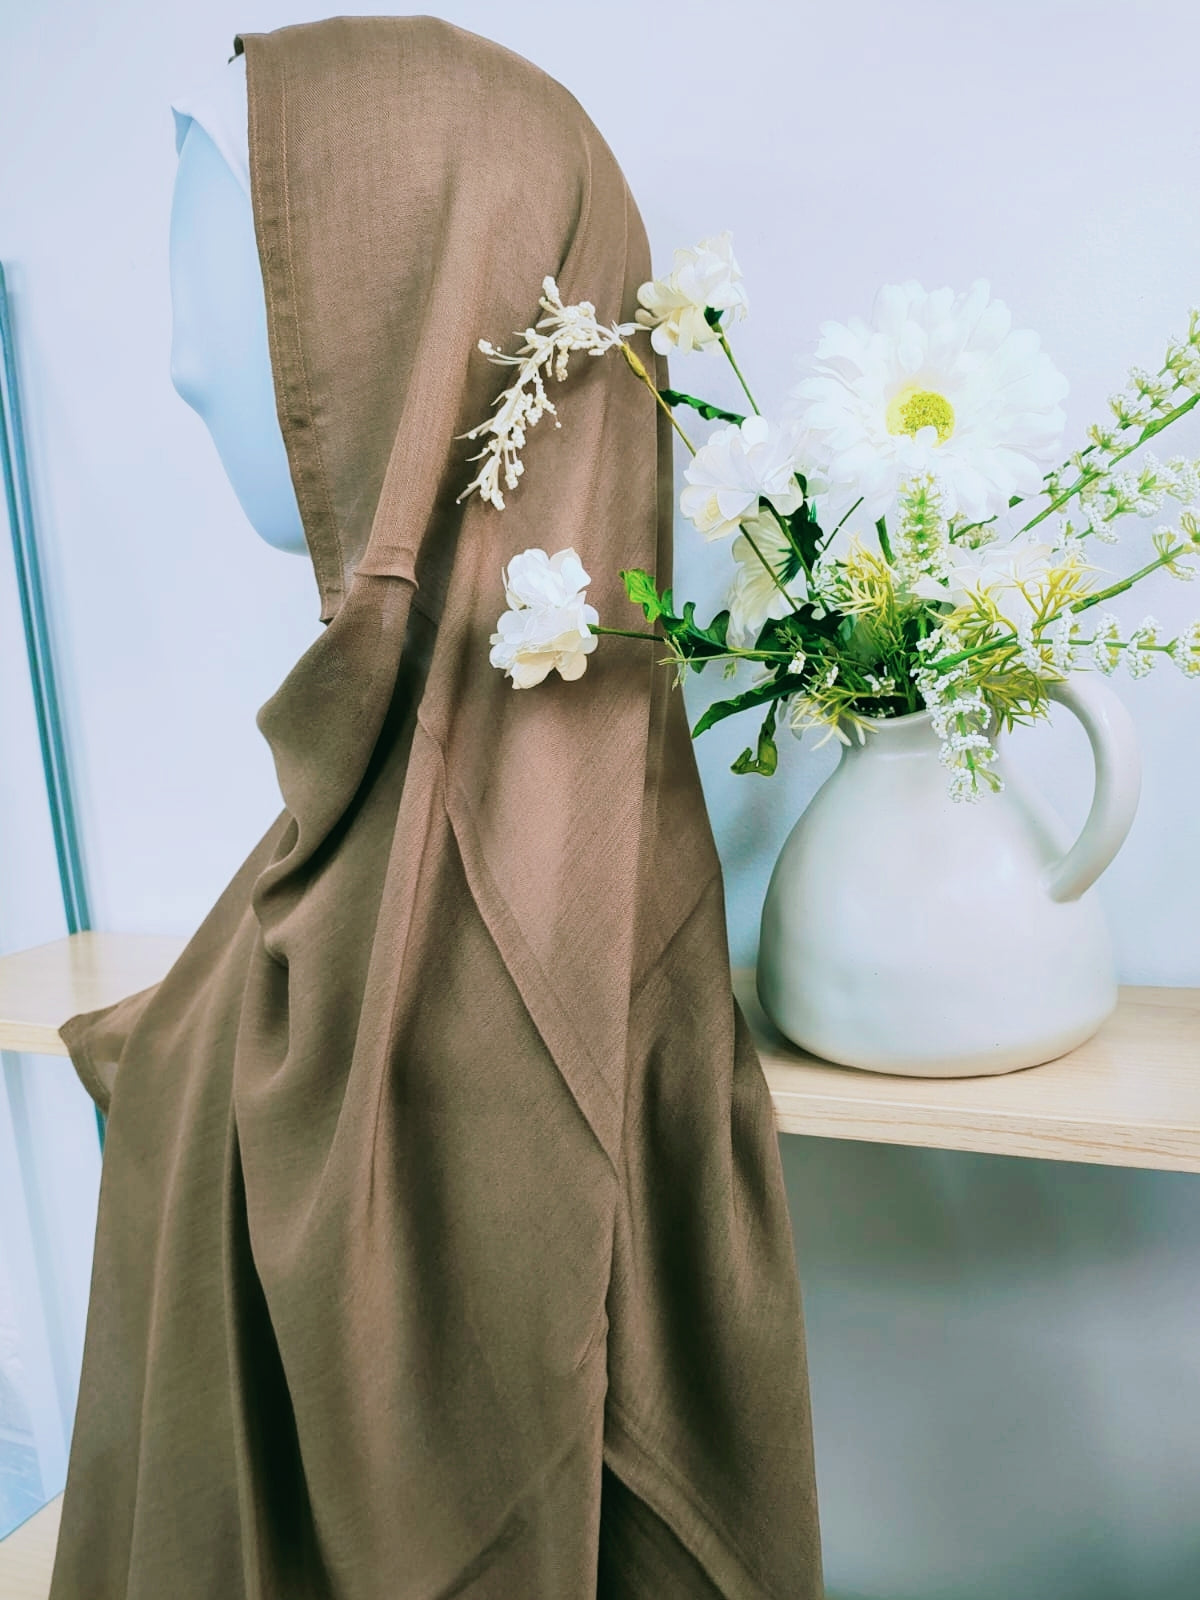 Shop now for our sophisticated Modal Hijab in Dark Khaki, a versatile staple for your hijab collection, available at Hikmah Boutique! Crafted with precision from premium modal fabric, renowned for its luxurious softness and breathability, this hijab ensures comfort and style all day. Based in Australia, Deliver Worldwide.